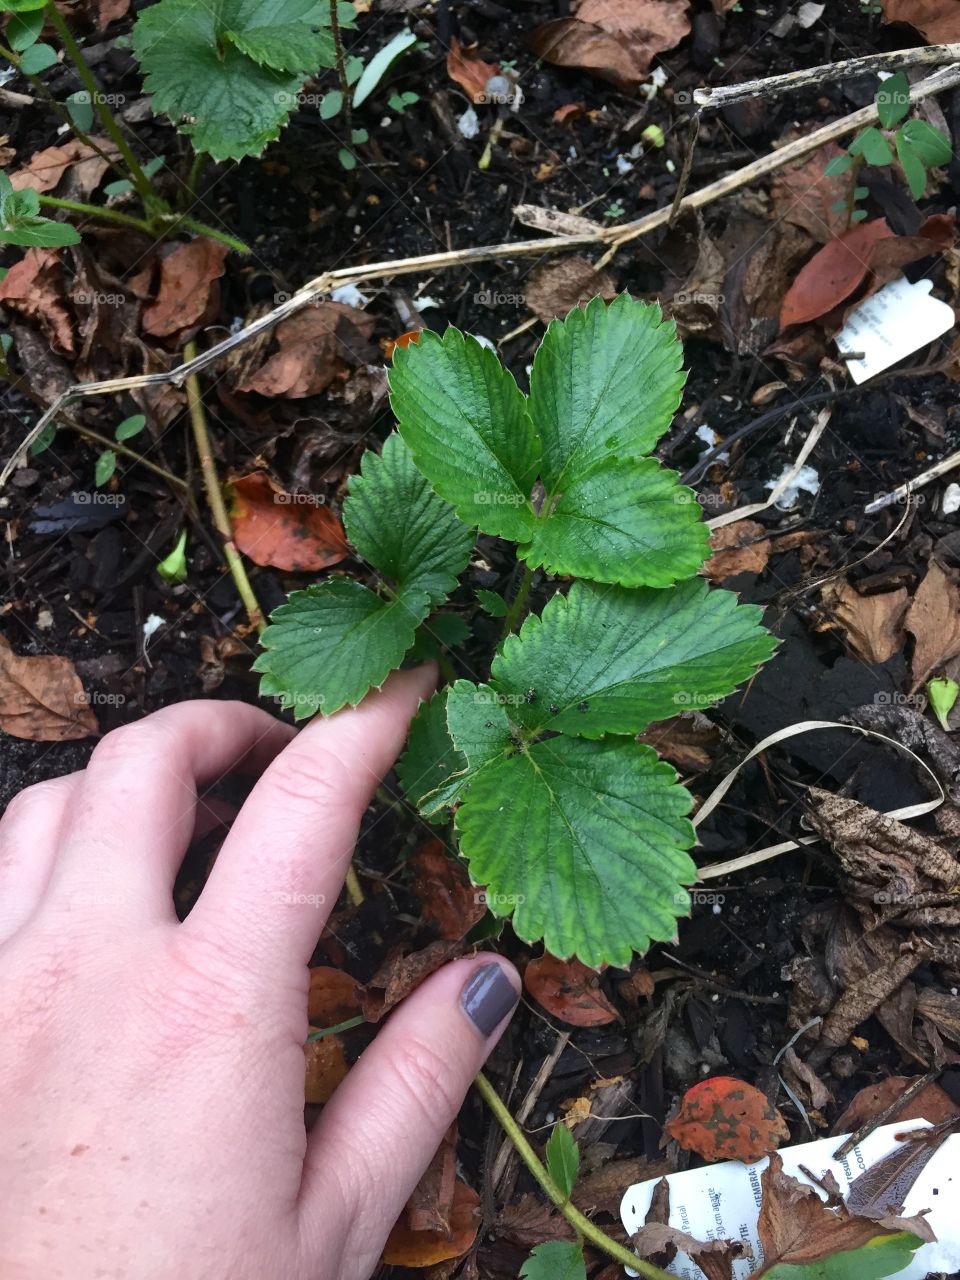 Giving some attention to our strawberry plants after last months harvest